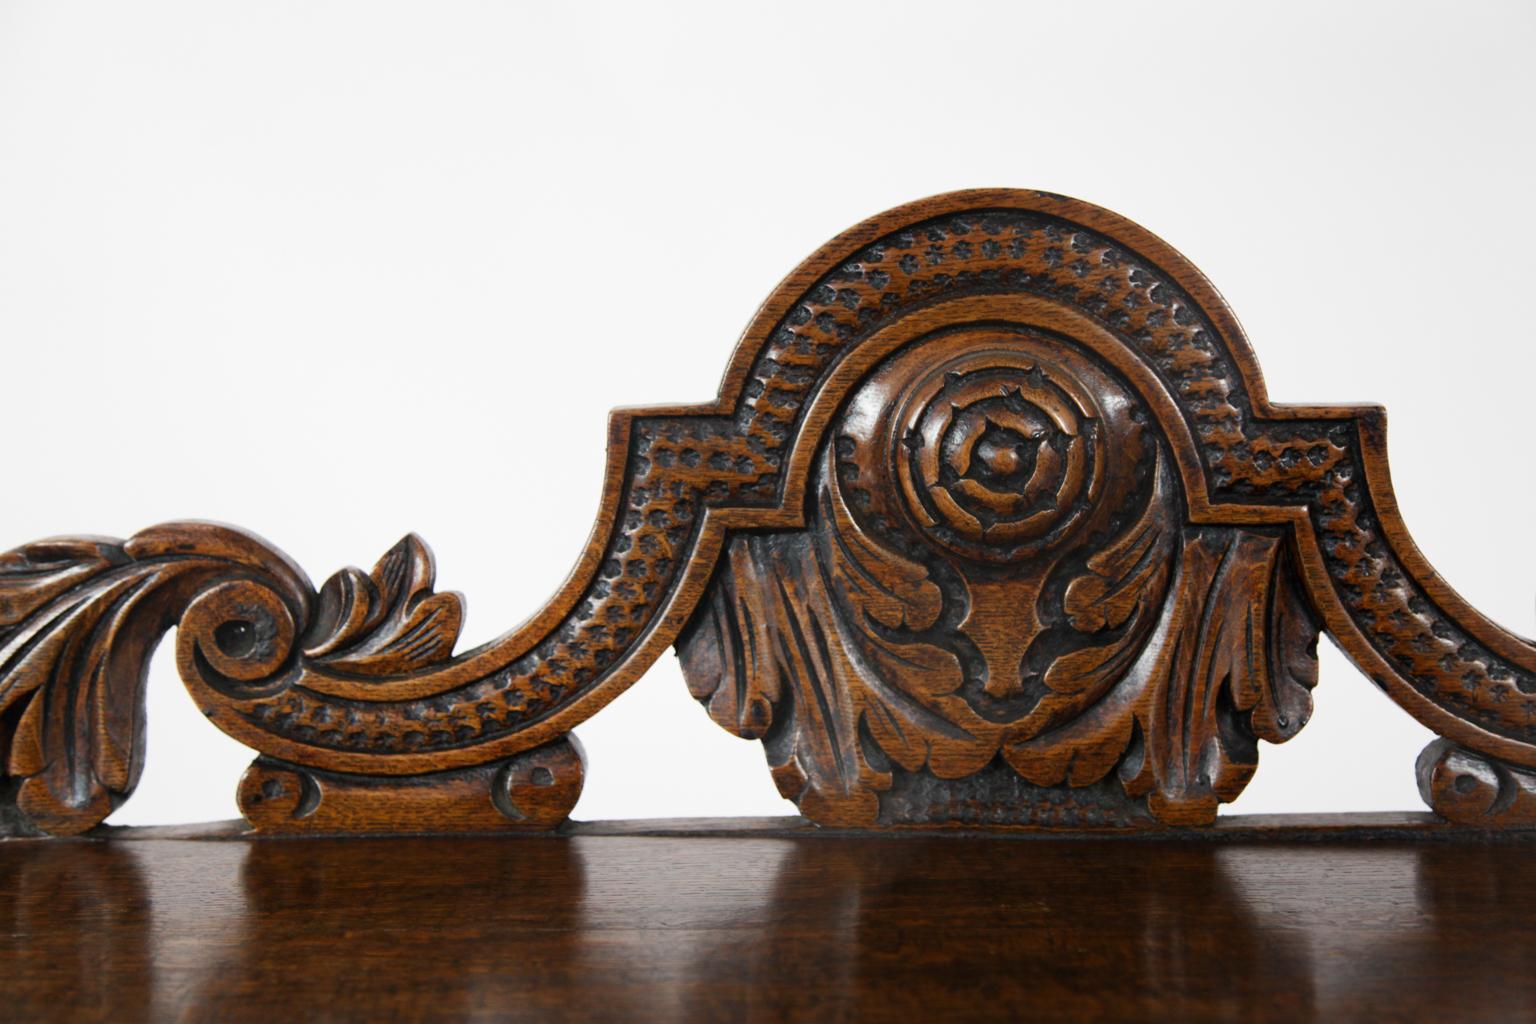 19th century Jacobean Revival carved oak side table, carved top molding and frieze, with carved and bobbin turned front legs, pilaster back legs, with elaborately carved gallery featuring floral swags and center medallion.